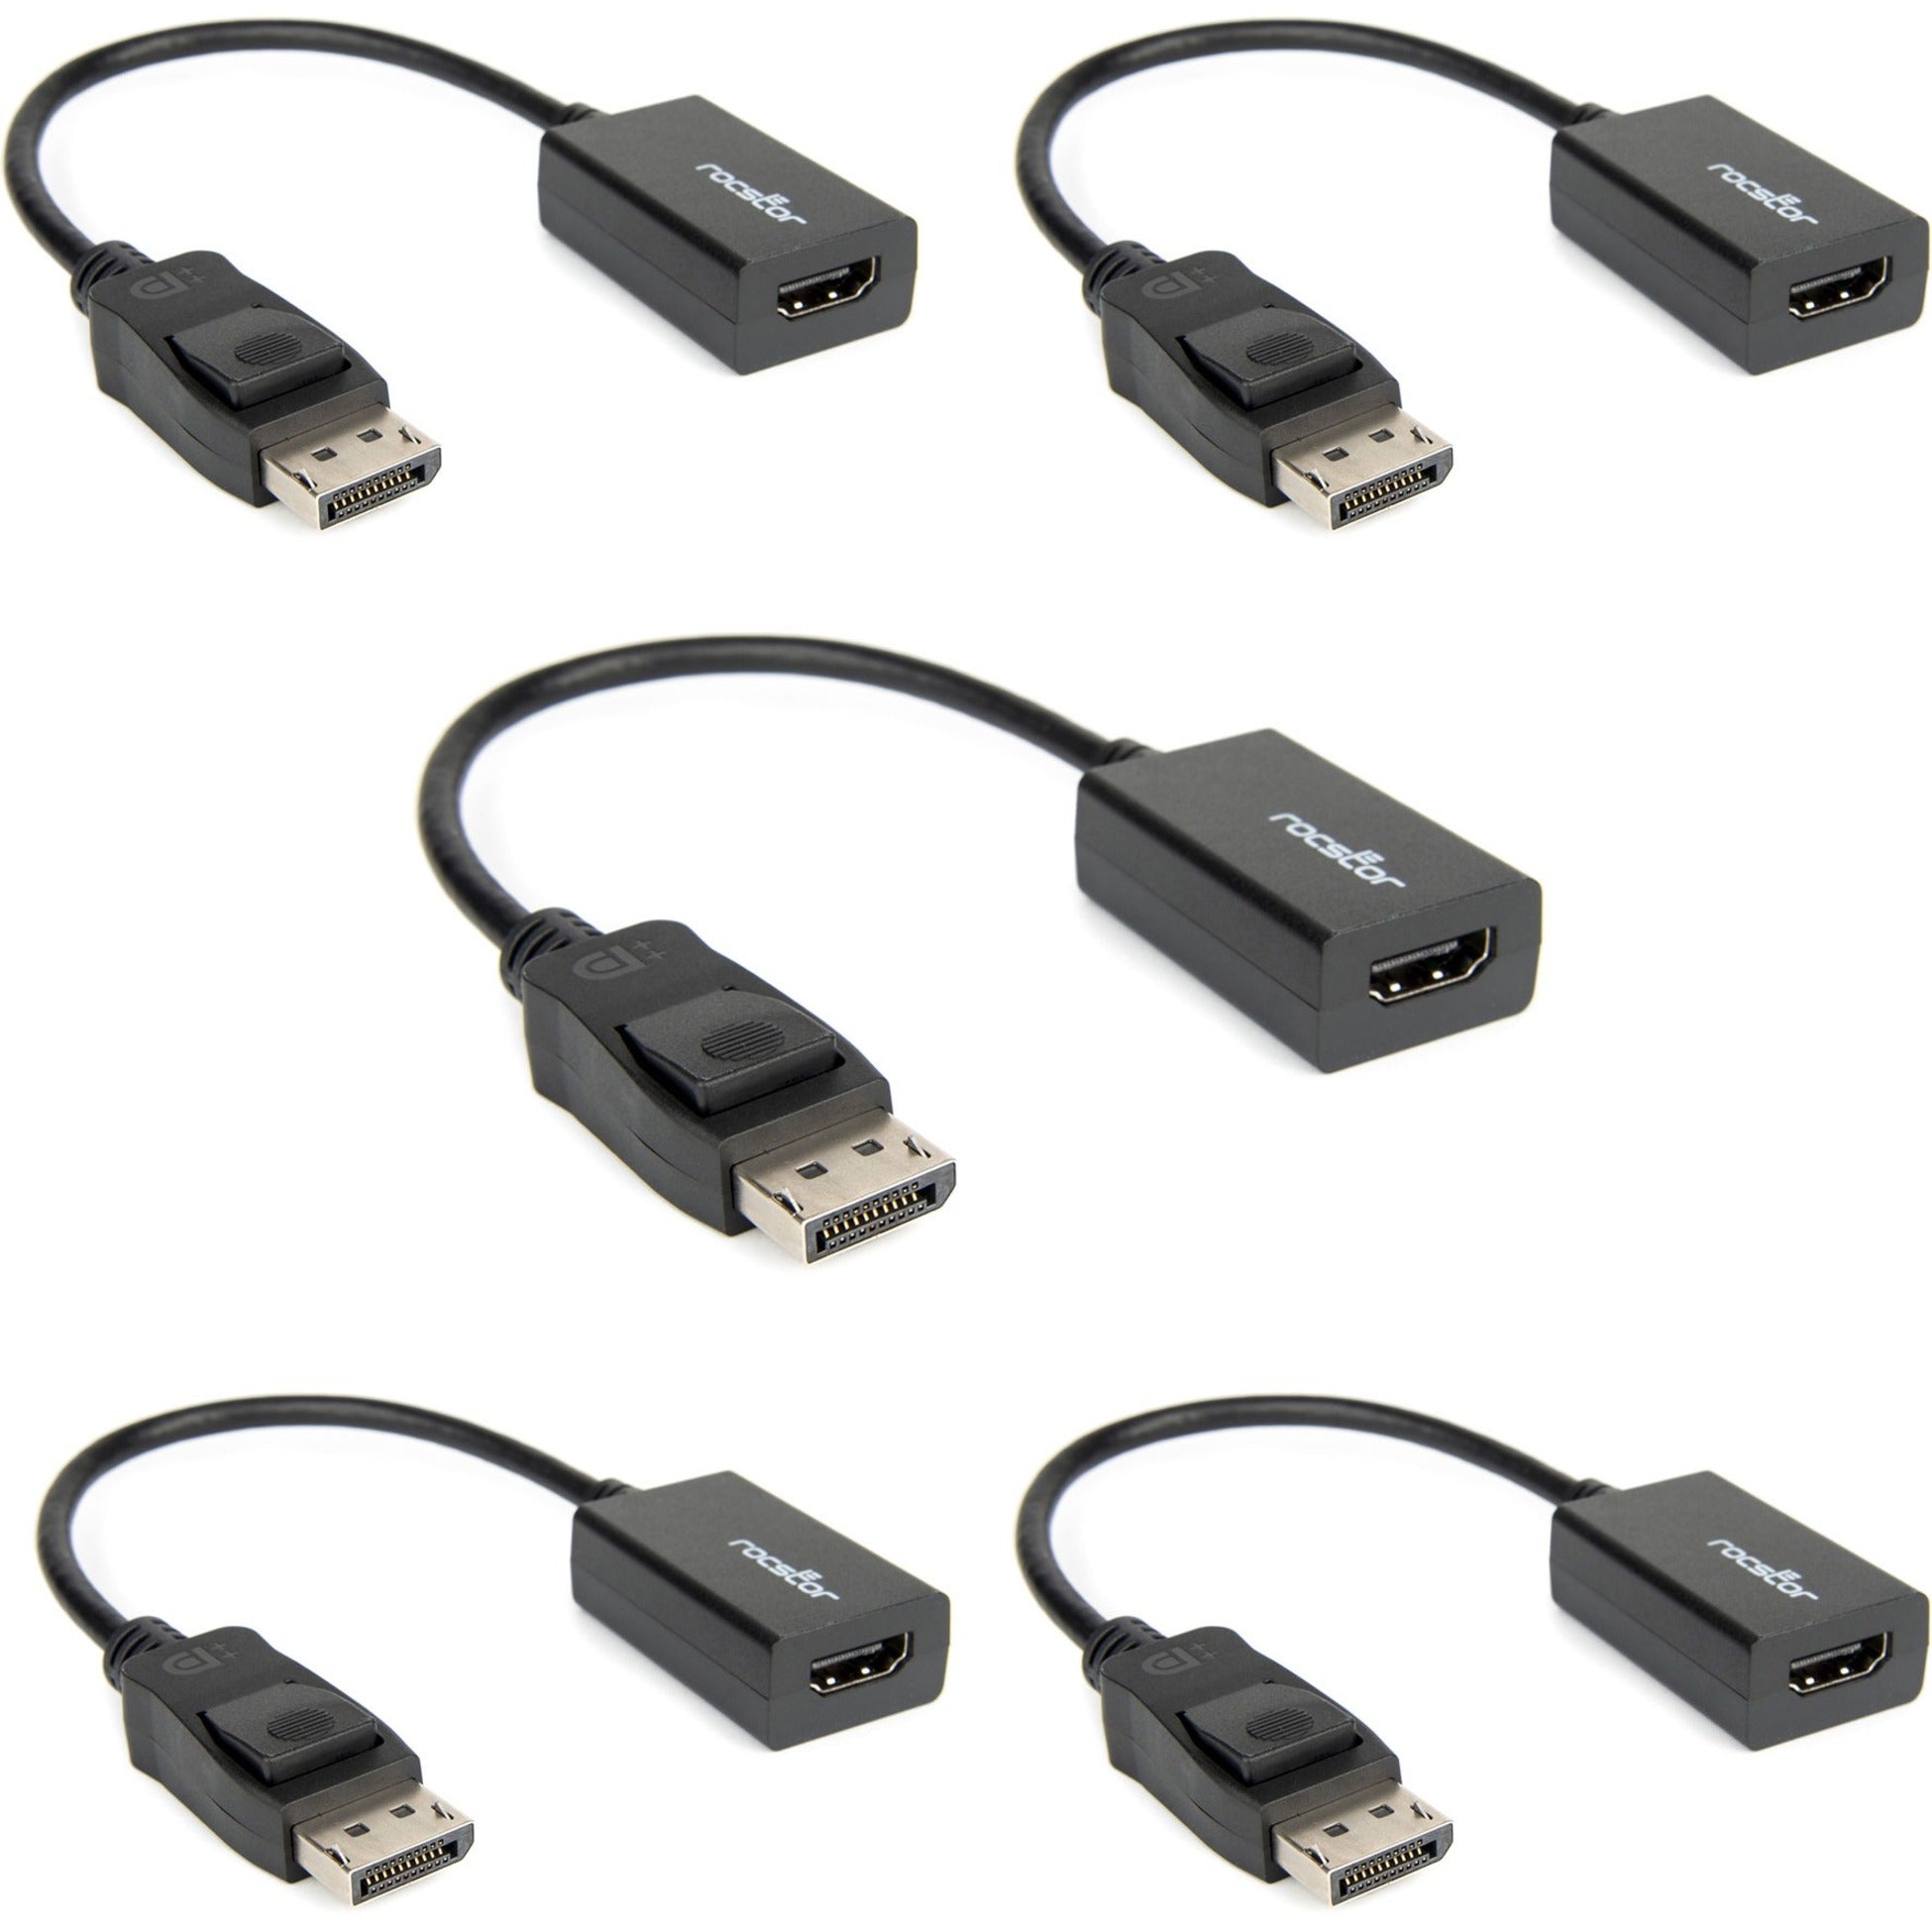 Rocstor Y10A101-B1-5PK DisplayPort/HDMI Audio/Video Adapter, Plug and Play, Lightweight